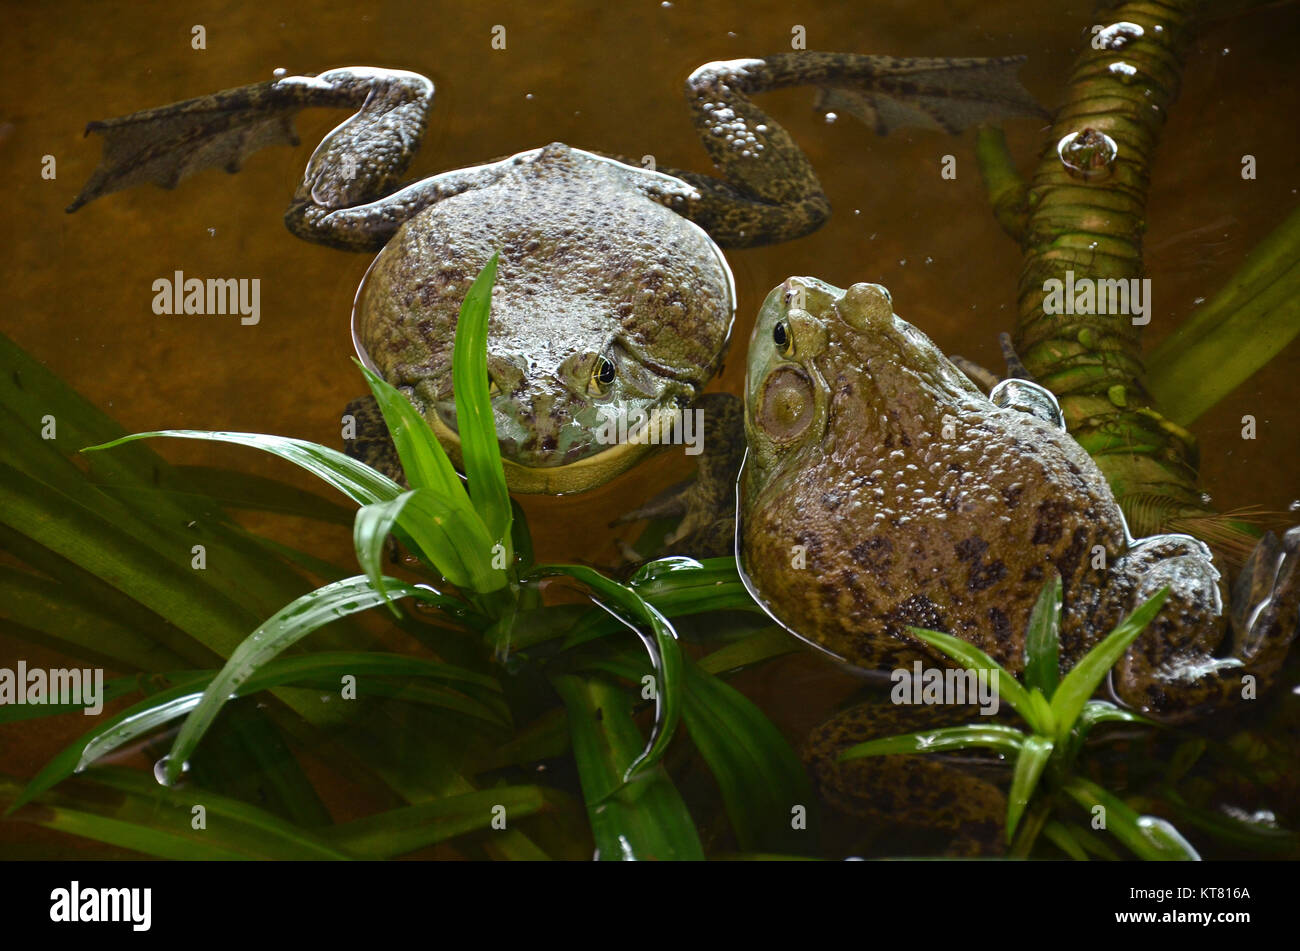 Bull frogs at a frog farm Stock Photo - Alamy